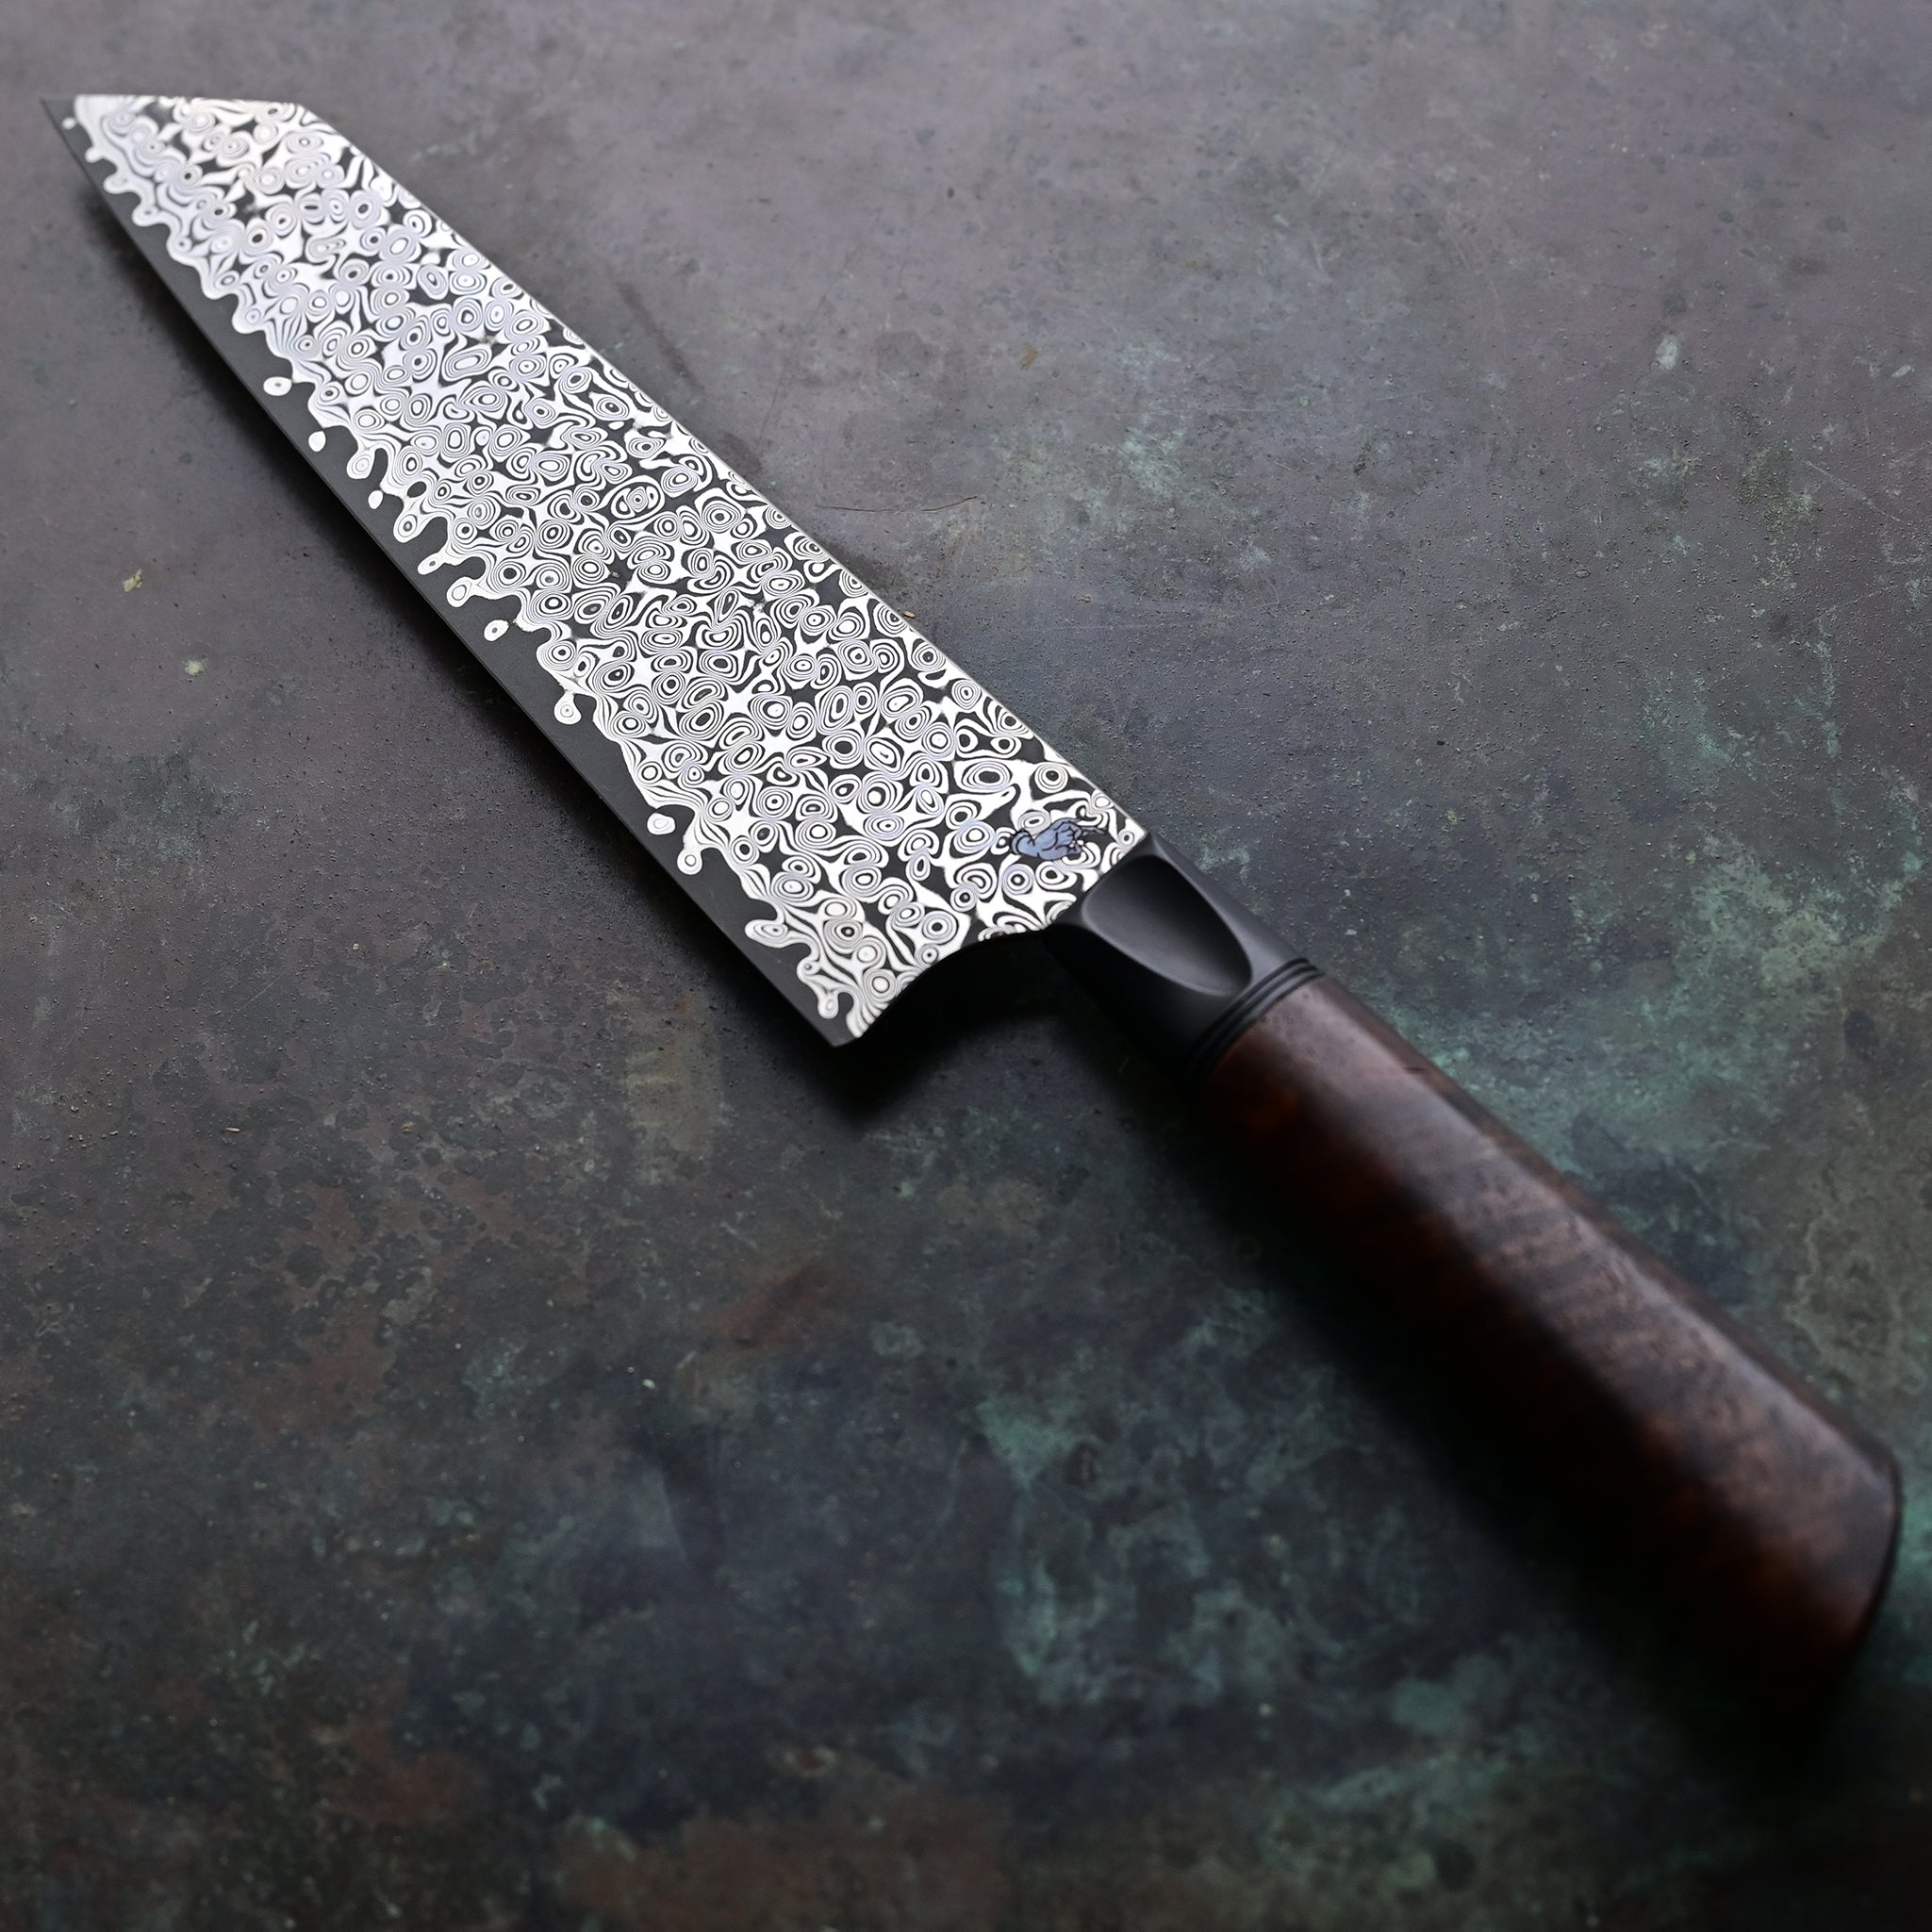 Elegantly redesigned Kiritsuke knife on a concrete surface, with a lighter, sharper blade, a warm brown Claro walnut handle, a sleek black anodized bolster, and a 7" Raindrop San Mai Damascus blade showcasing a mesmerizing pattern